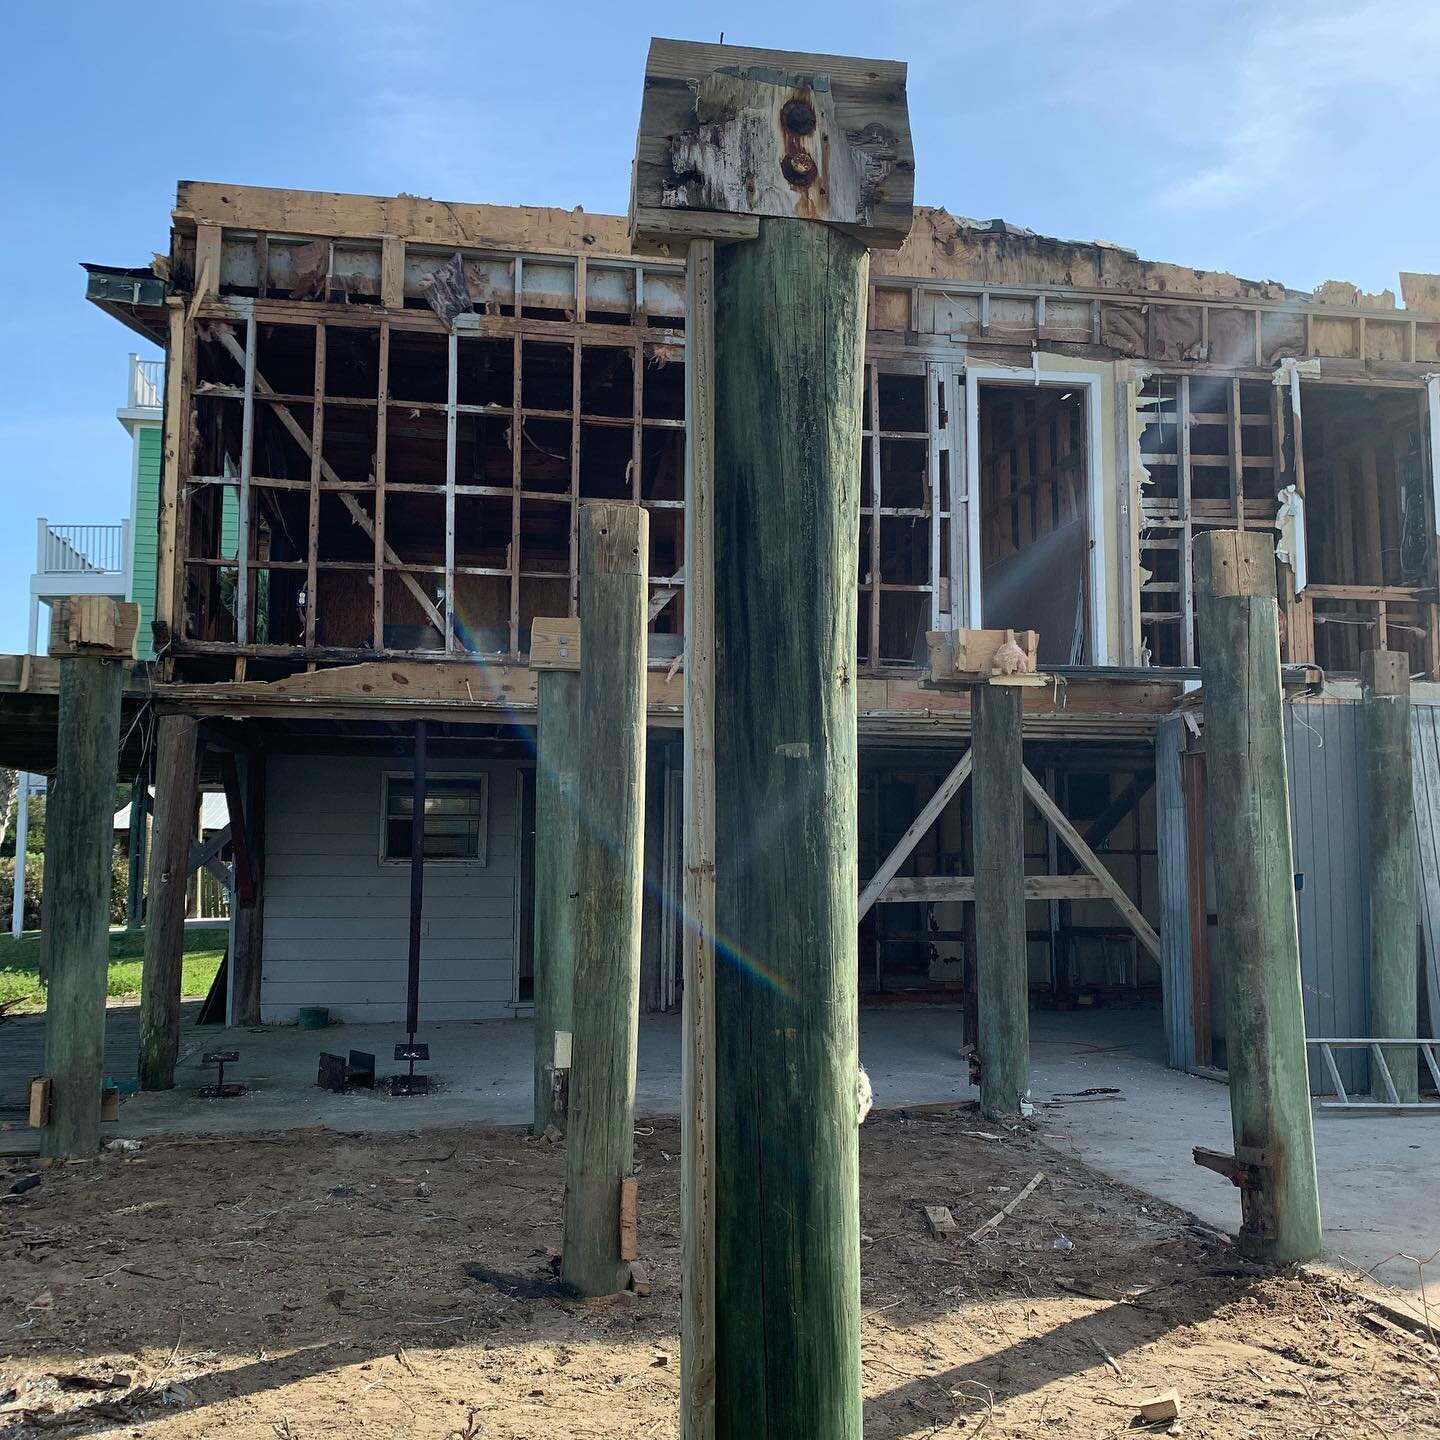 Pile foundation below an old building which was no longer stable. Stay tuned for the new one coming.  #oldhouse #structure #renovation #demolition #architecture #homerenovations #follybeach #construction #constructionsite #sitevisit